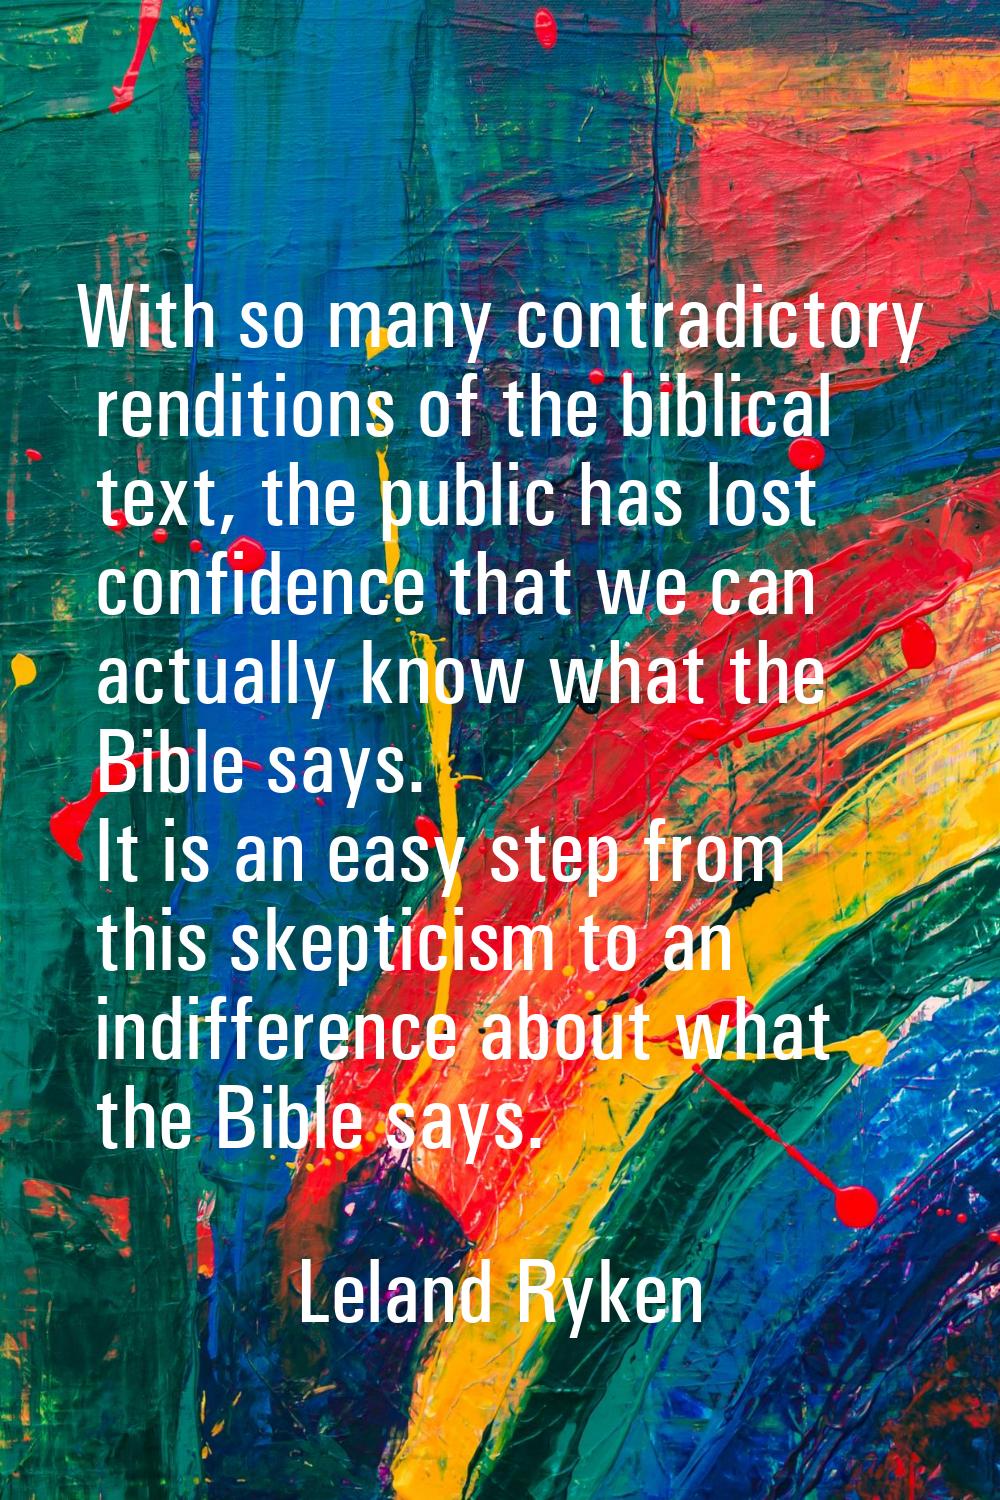 With so many contradictory renditions of the biblical text, the public has lost confidence that we 